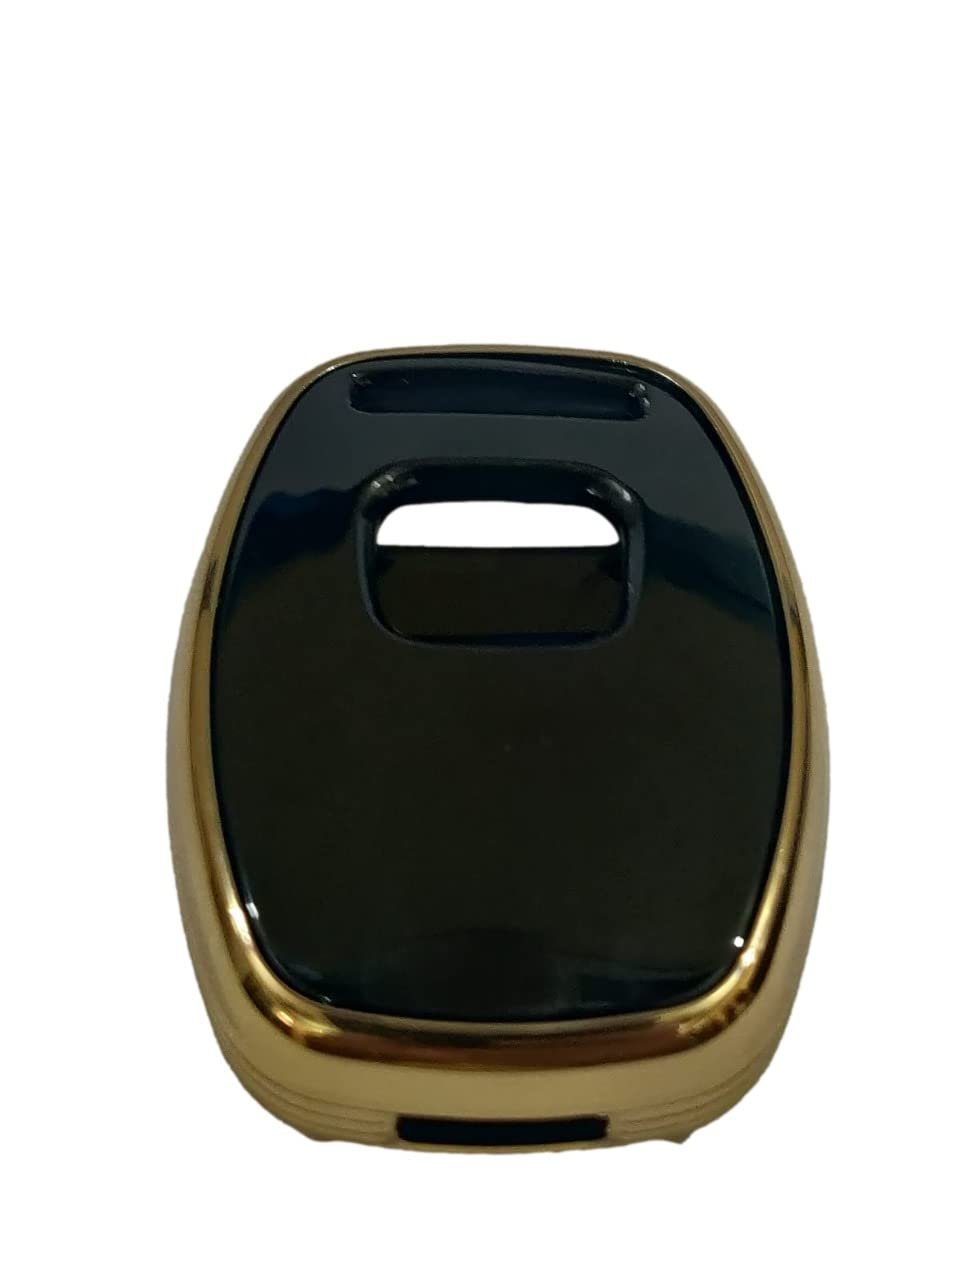 TPU Silicone key Cover For Compatible with City, CIvic, Jazz, Brio, Amaze 2 Button Remote key (Black) Image 